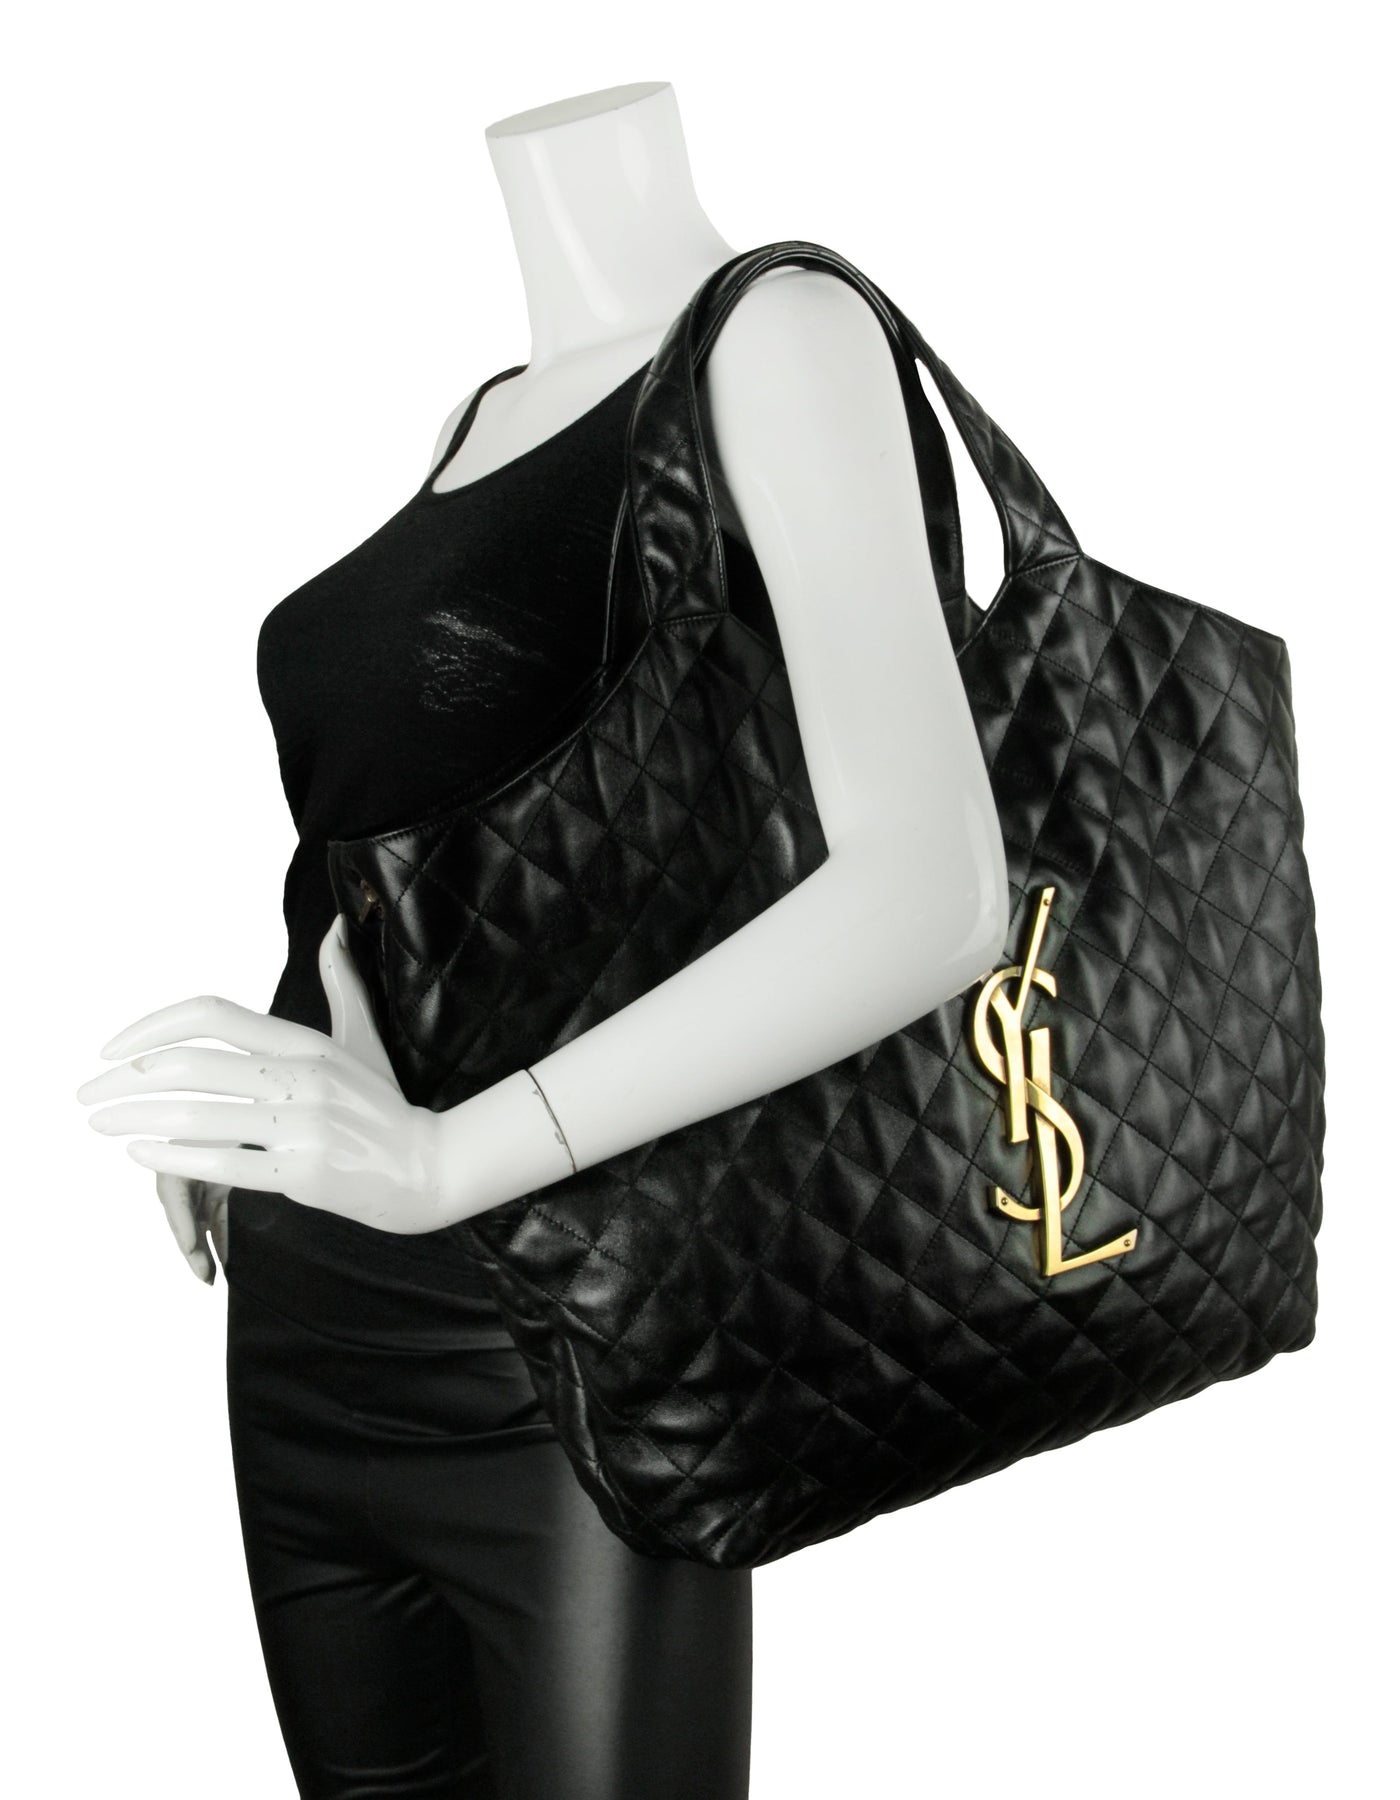 Saint Laurent Icare Maxi Shopping Tote Bag in Black Quilted